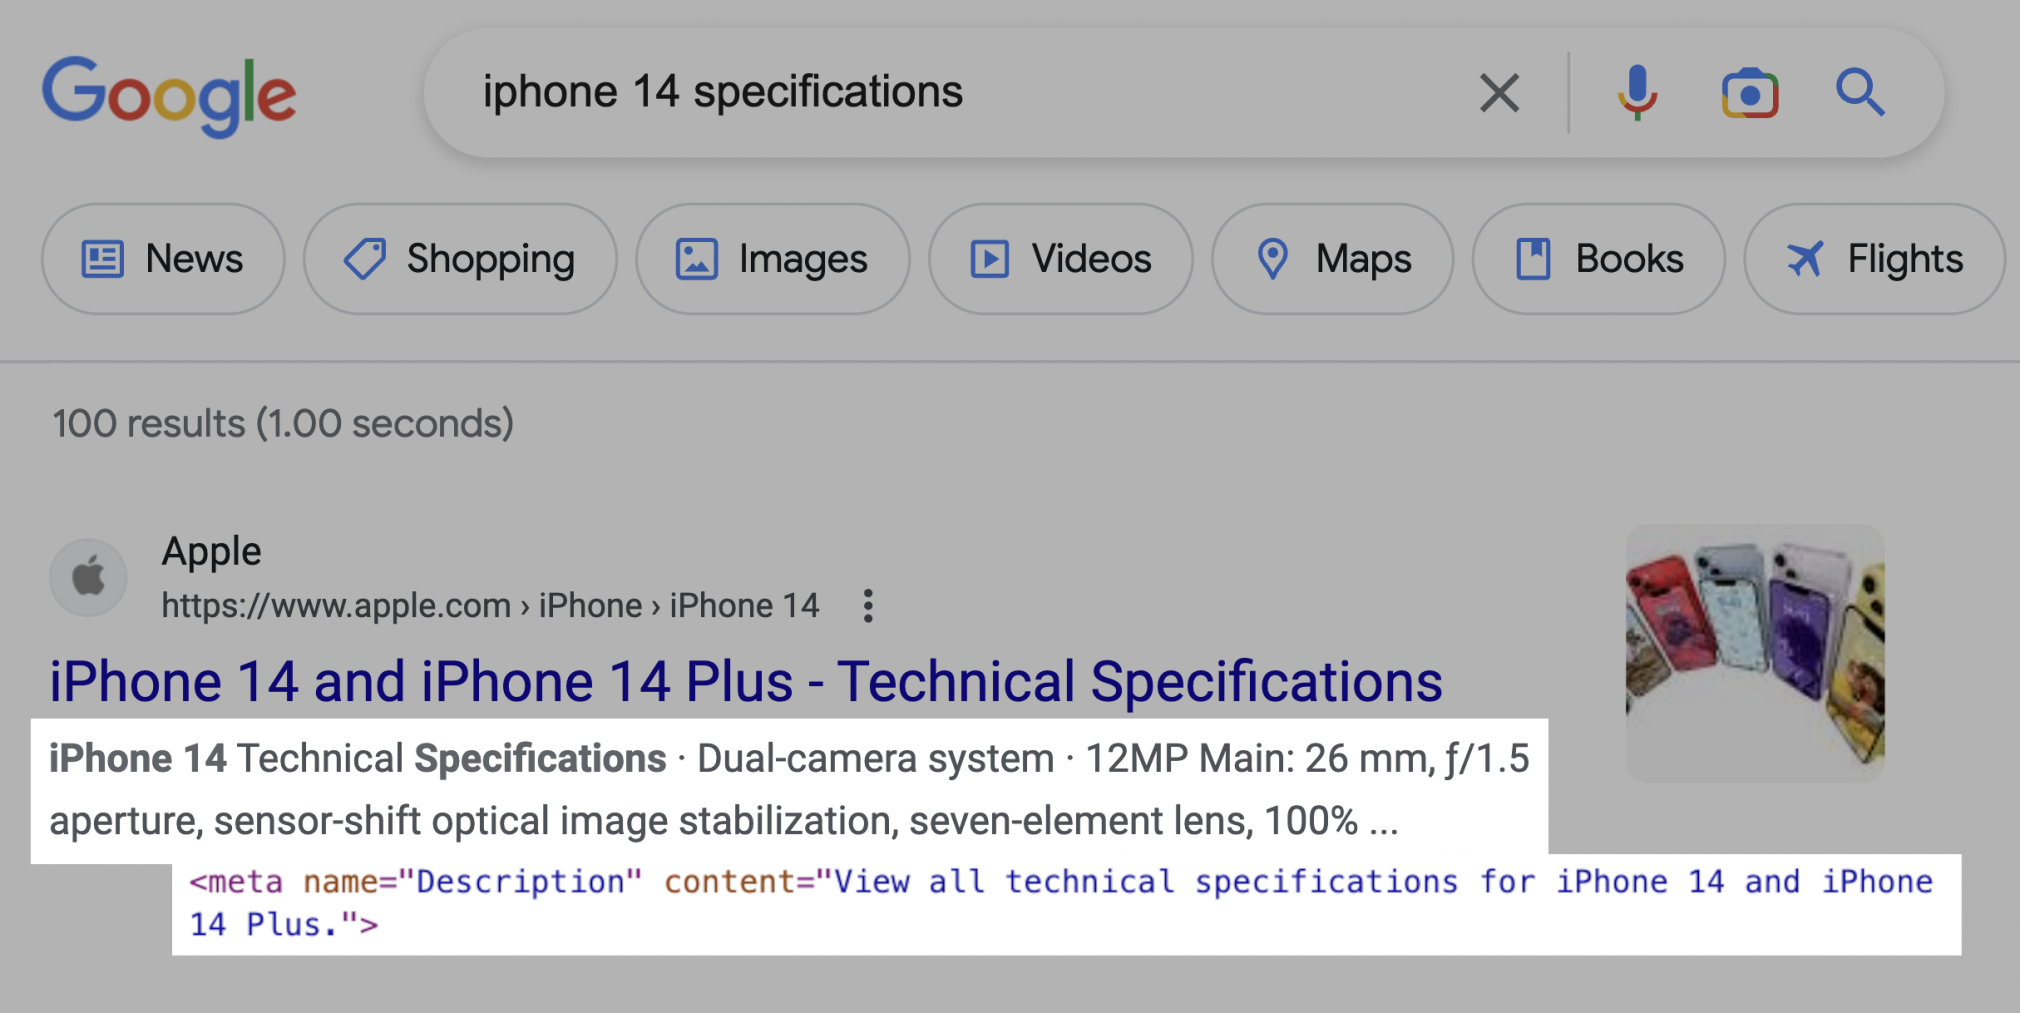 Search engine results page for iphone 14 specifications, highlighting the meta description vs the original provided meta description